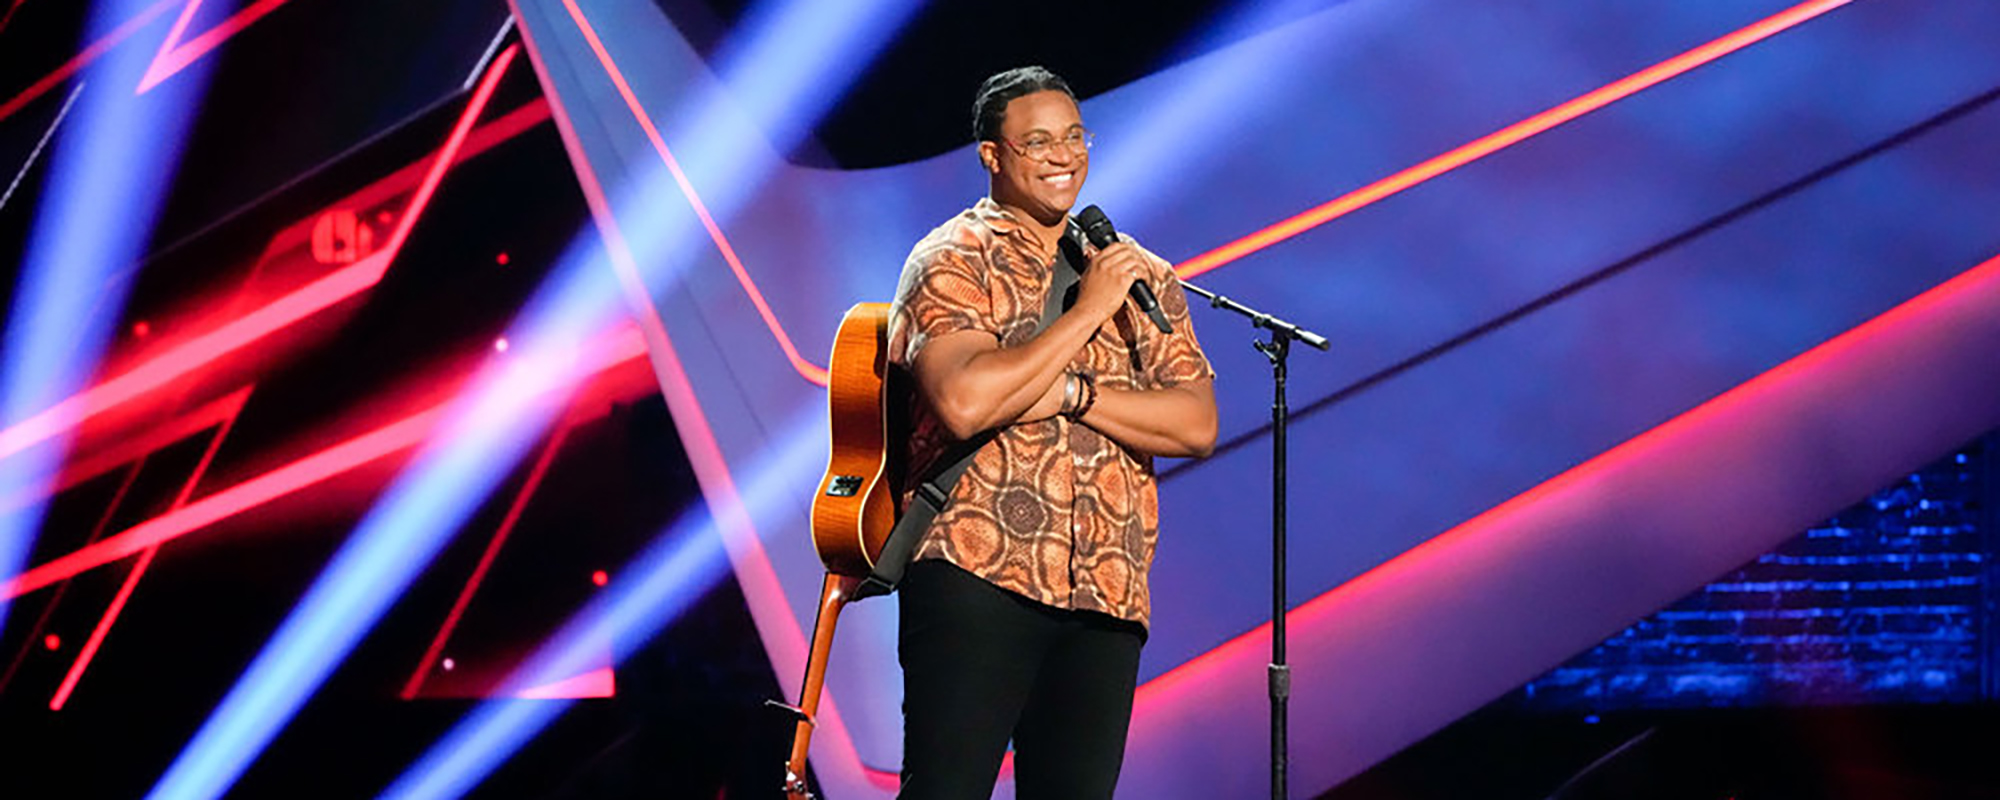 NOIVAS Stuns with ‘The Voice’ Audition That Scores Four Chair Turns